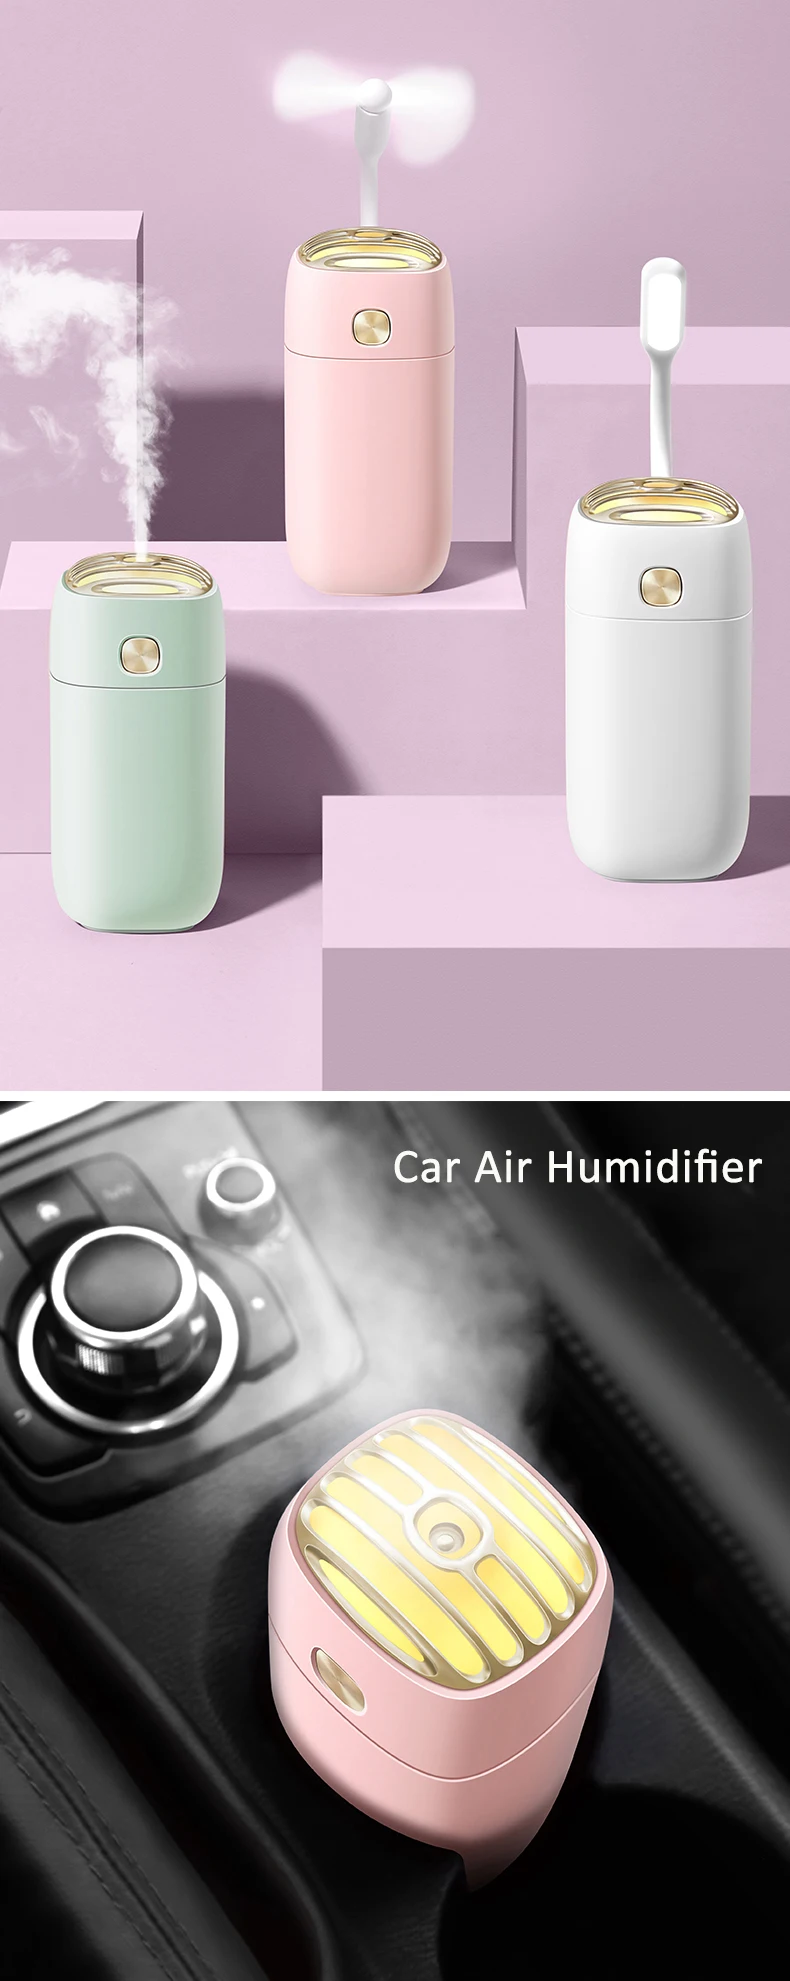 2018 Home Appliances Air Conditioning Appliances Portable Classic Ultrasonic Aroma Diffuser Cool Air Humidifier